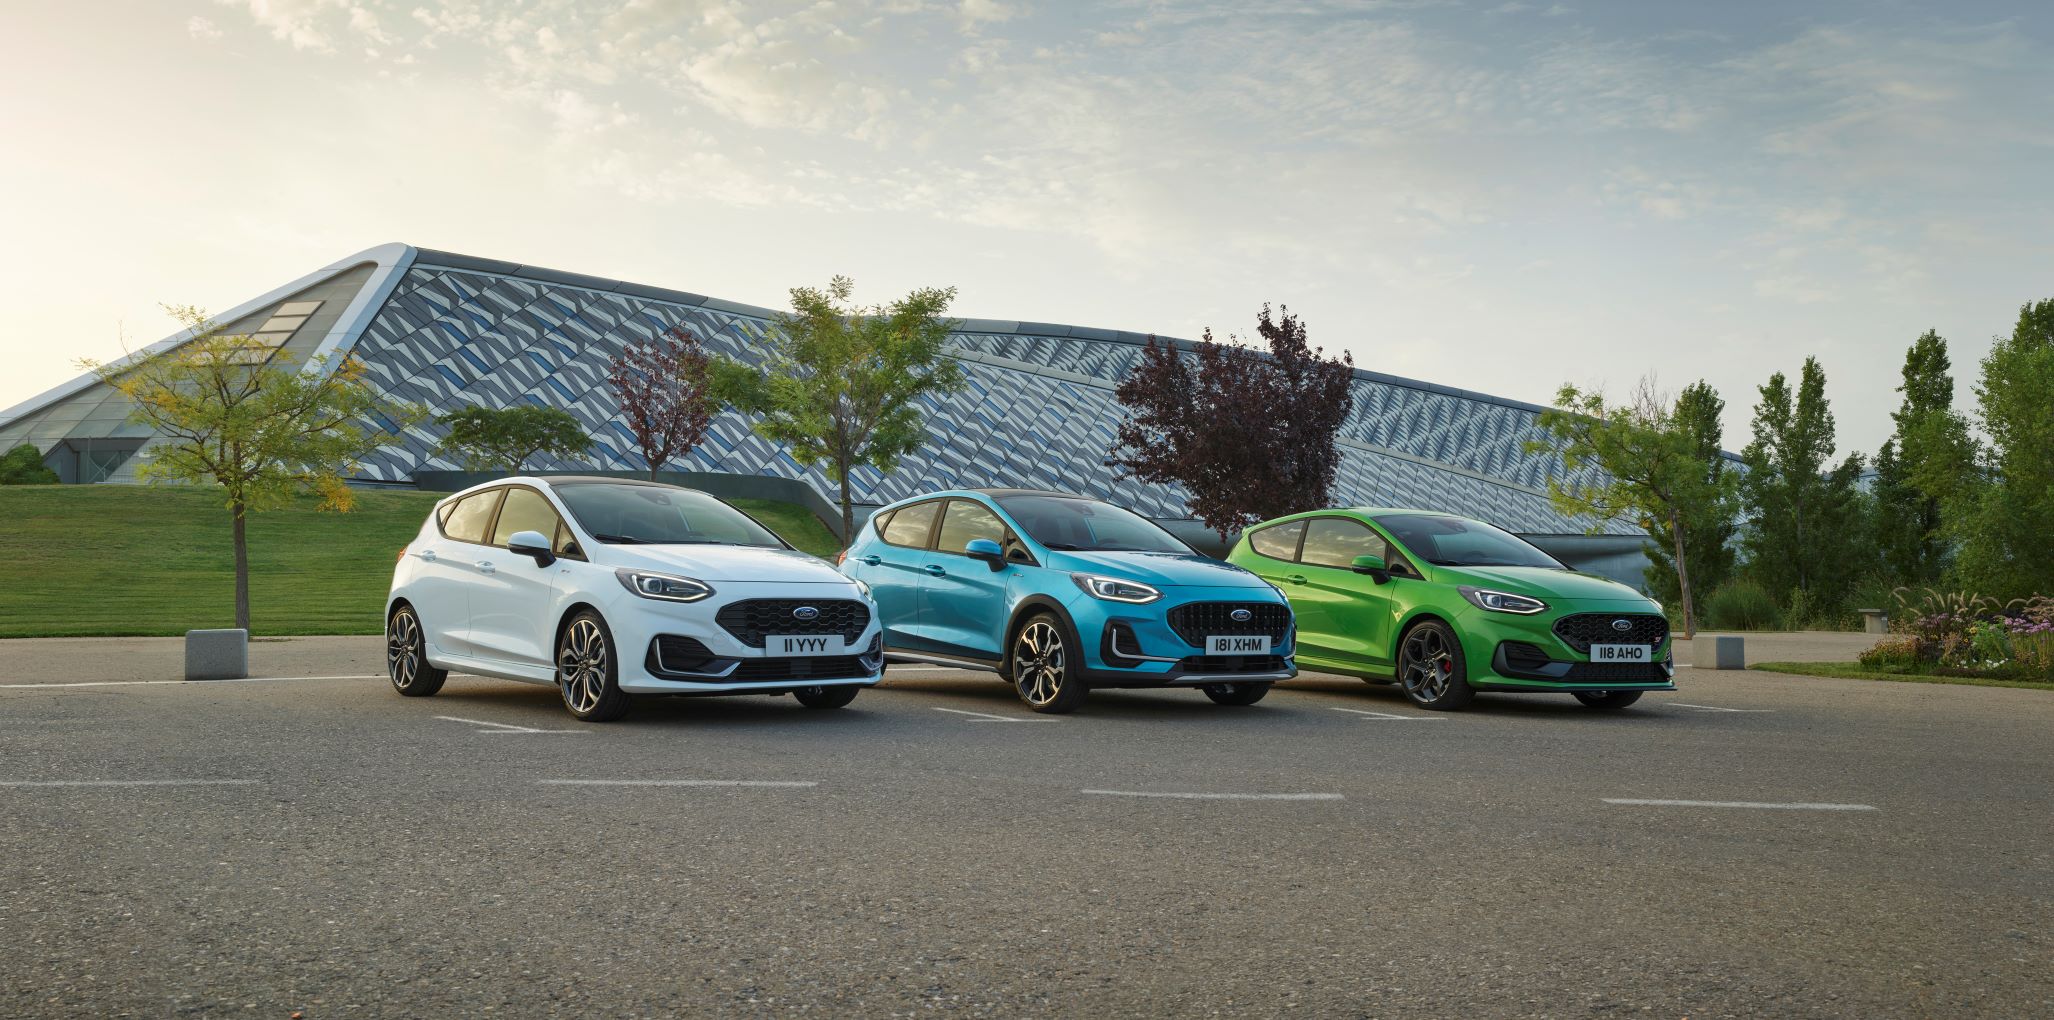 Three 2022 Ford Fiesta hatchbacks photographed in white, blue and green.